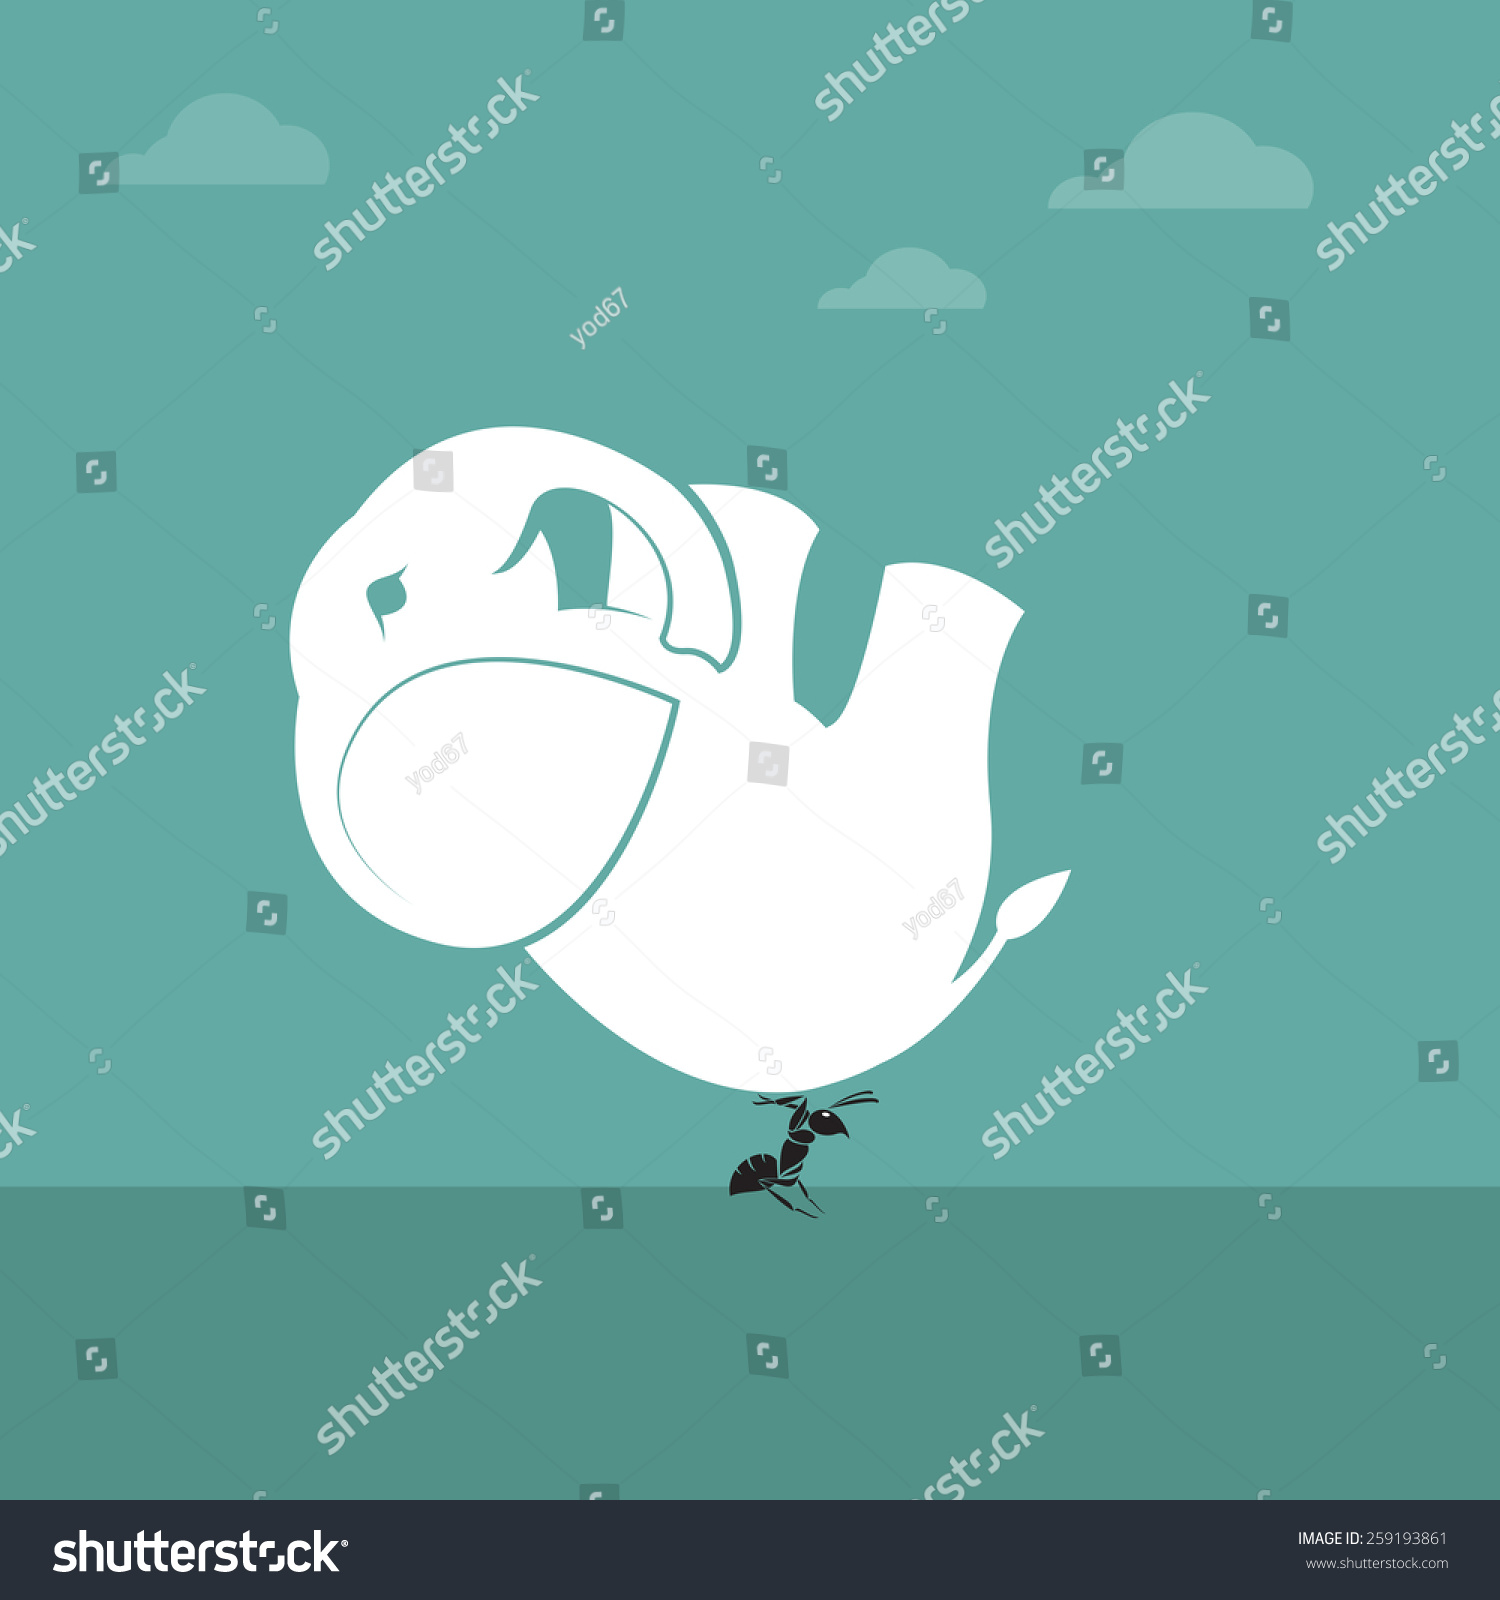 stock-vector-vector-image-of-ant-lifting-an-elephant-impossible-concept-259193861.jpg